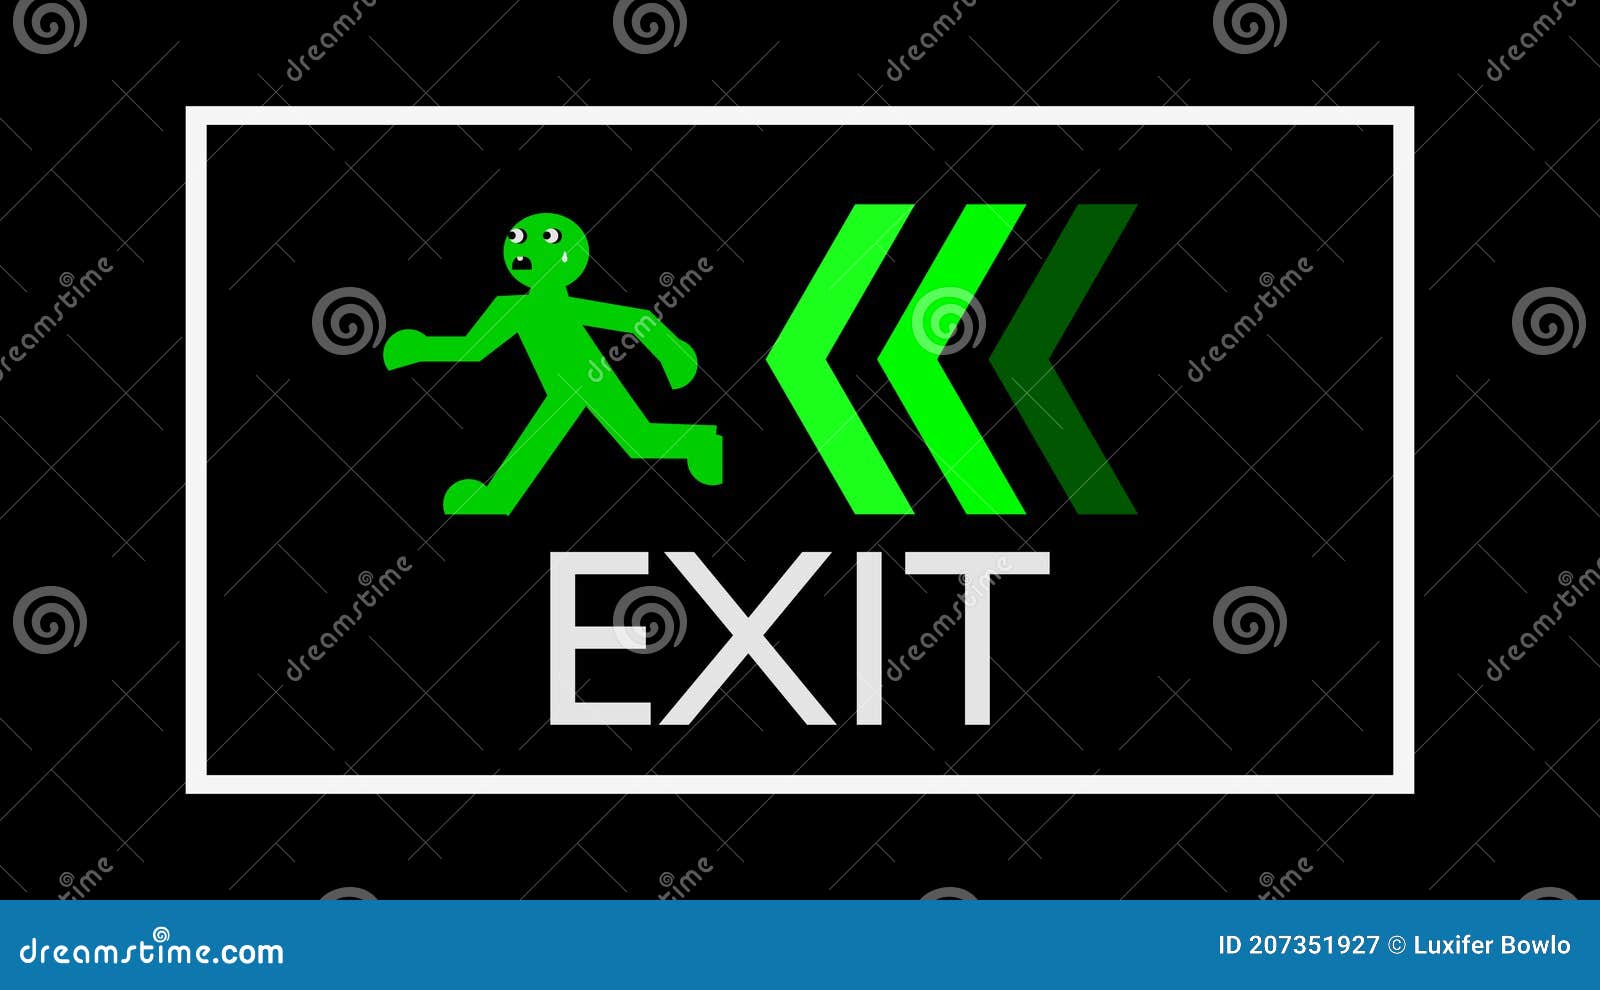 Exit Logo Vector Art PNG, Safety Exit Logo Design Vector, Safety Exit, Logo  Design, Door PNG Image For Free Download